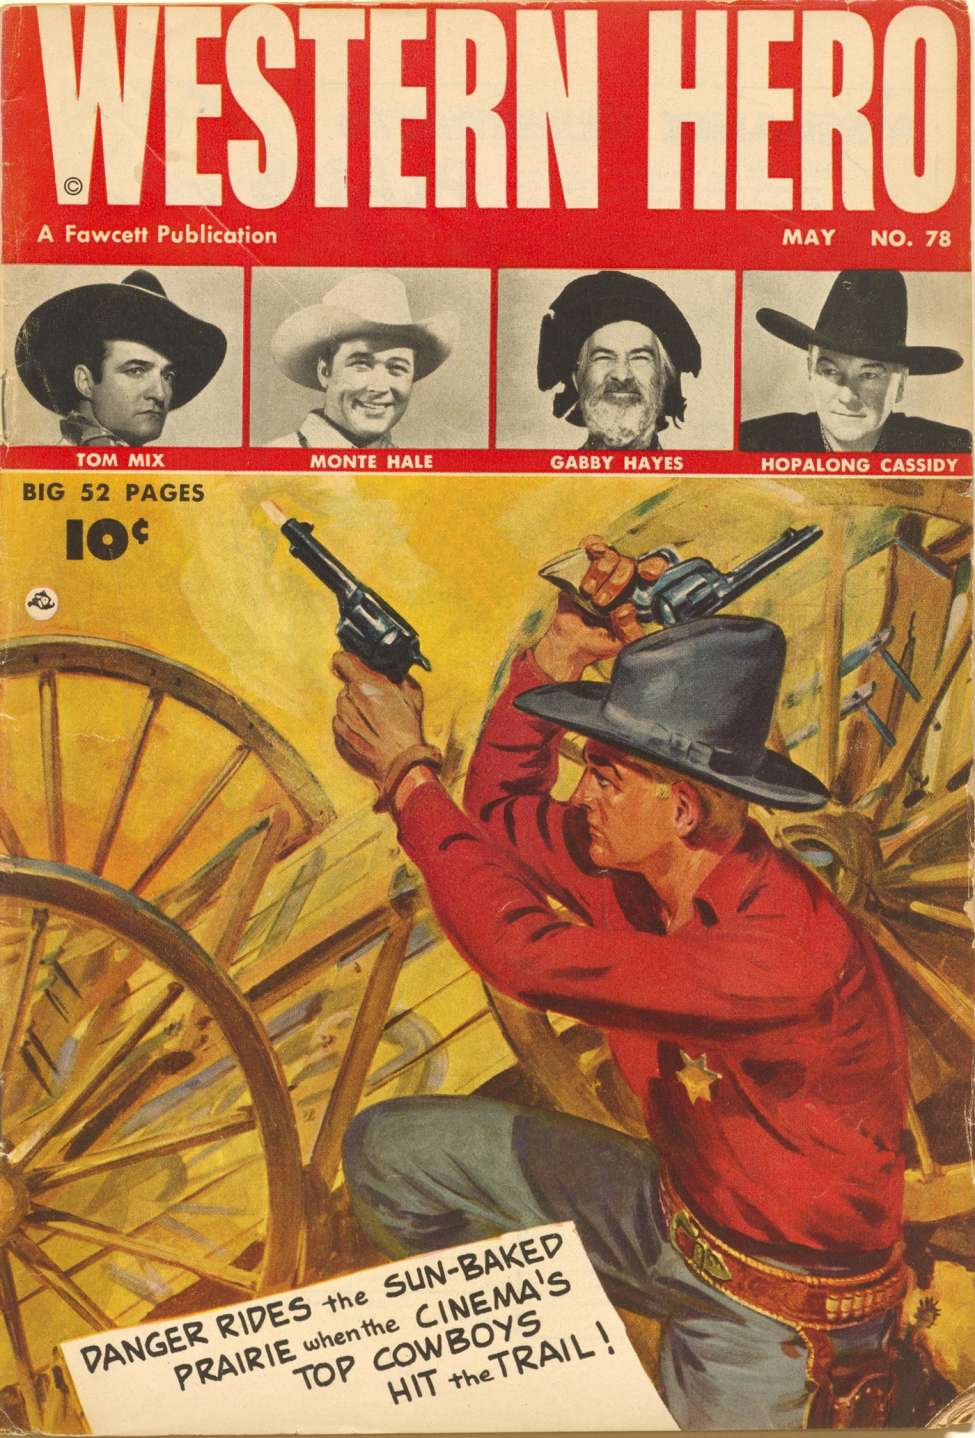 Book Cover For Western Hero 78